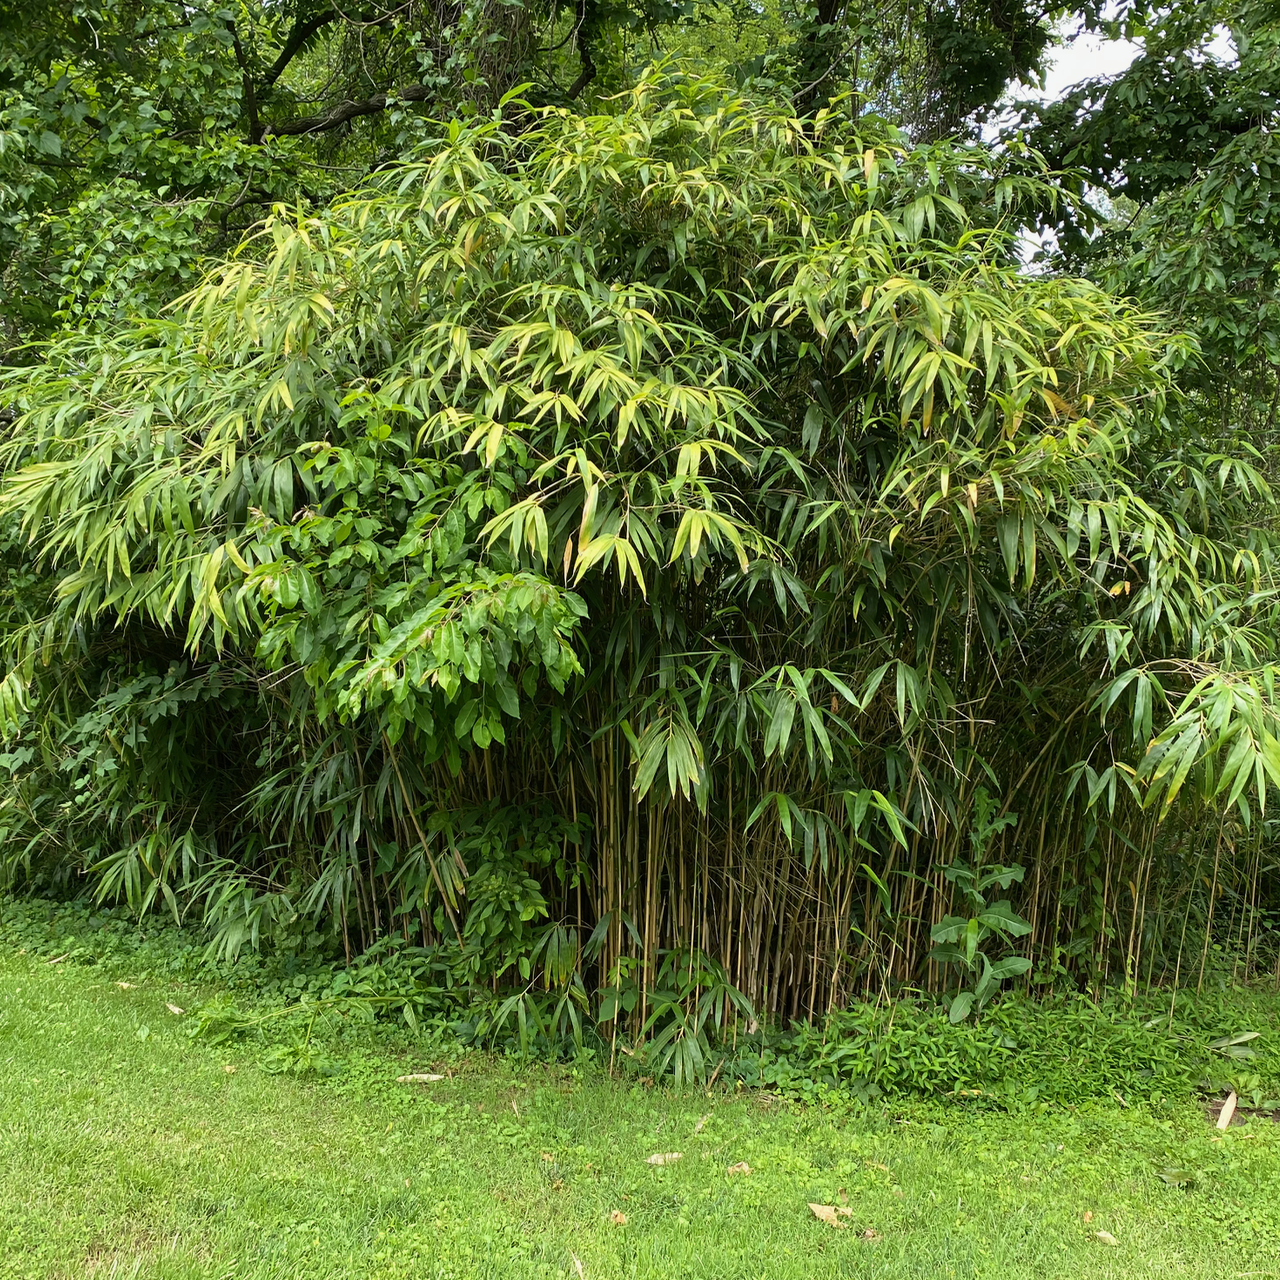 Seems like a small patch of Bamboo